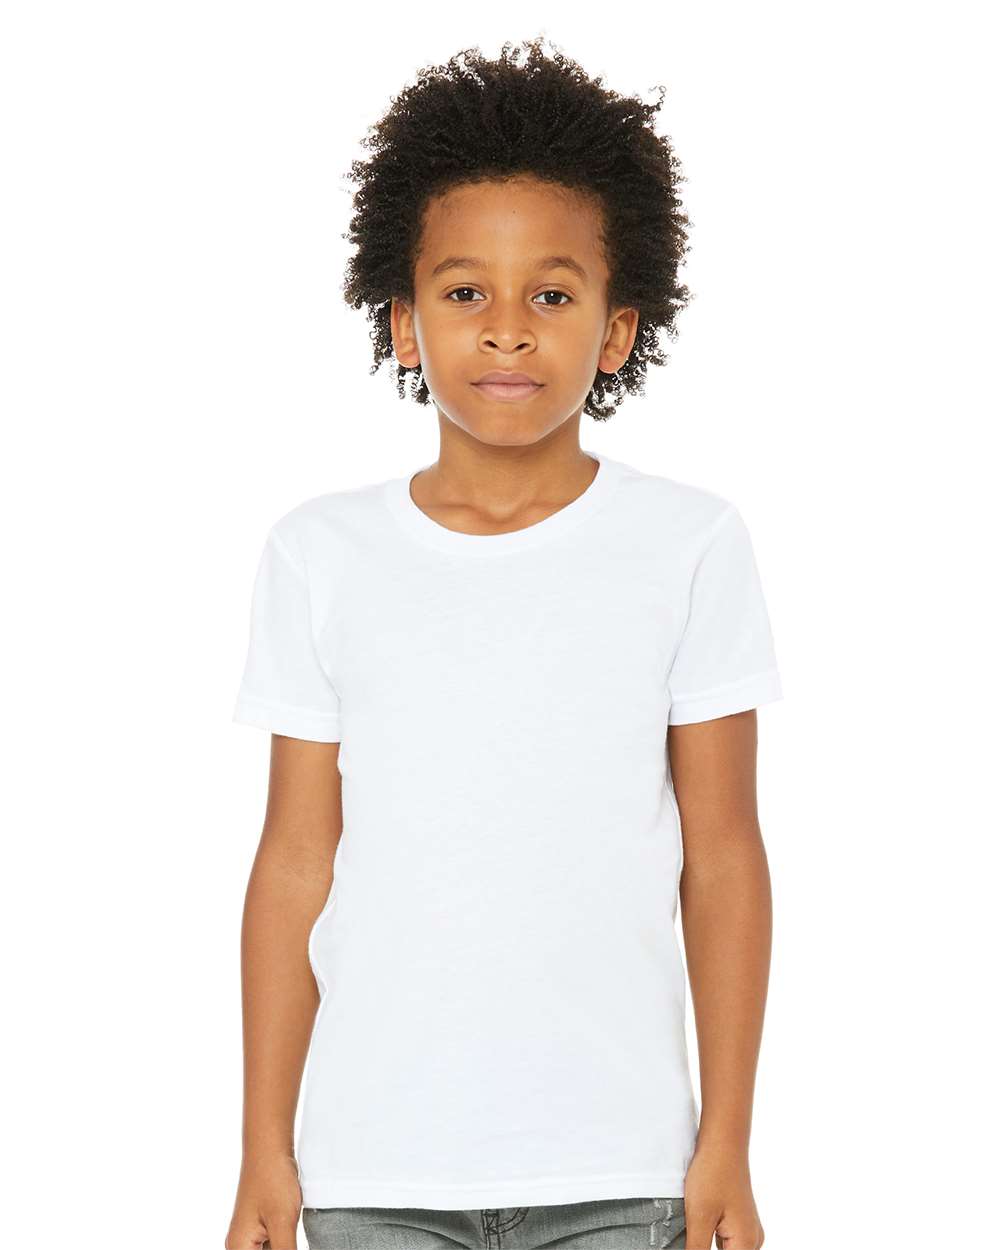 Sale Youth Deluxe T-Shirt